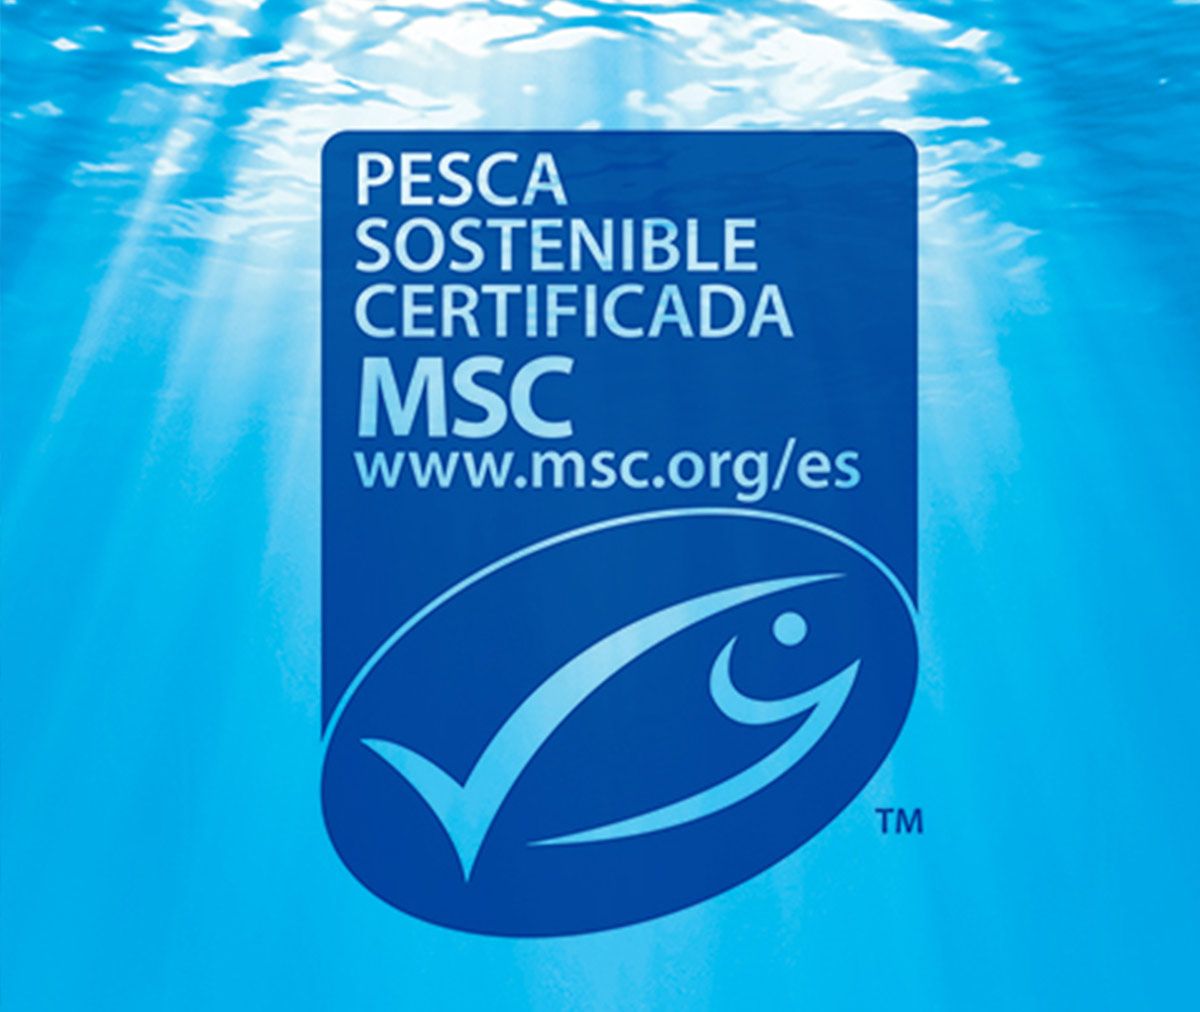 Seafreeze Limited, Grupo Profand’s subsidiary, received the MSC certification of sustainable fishing